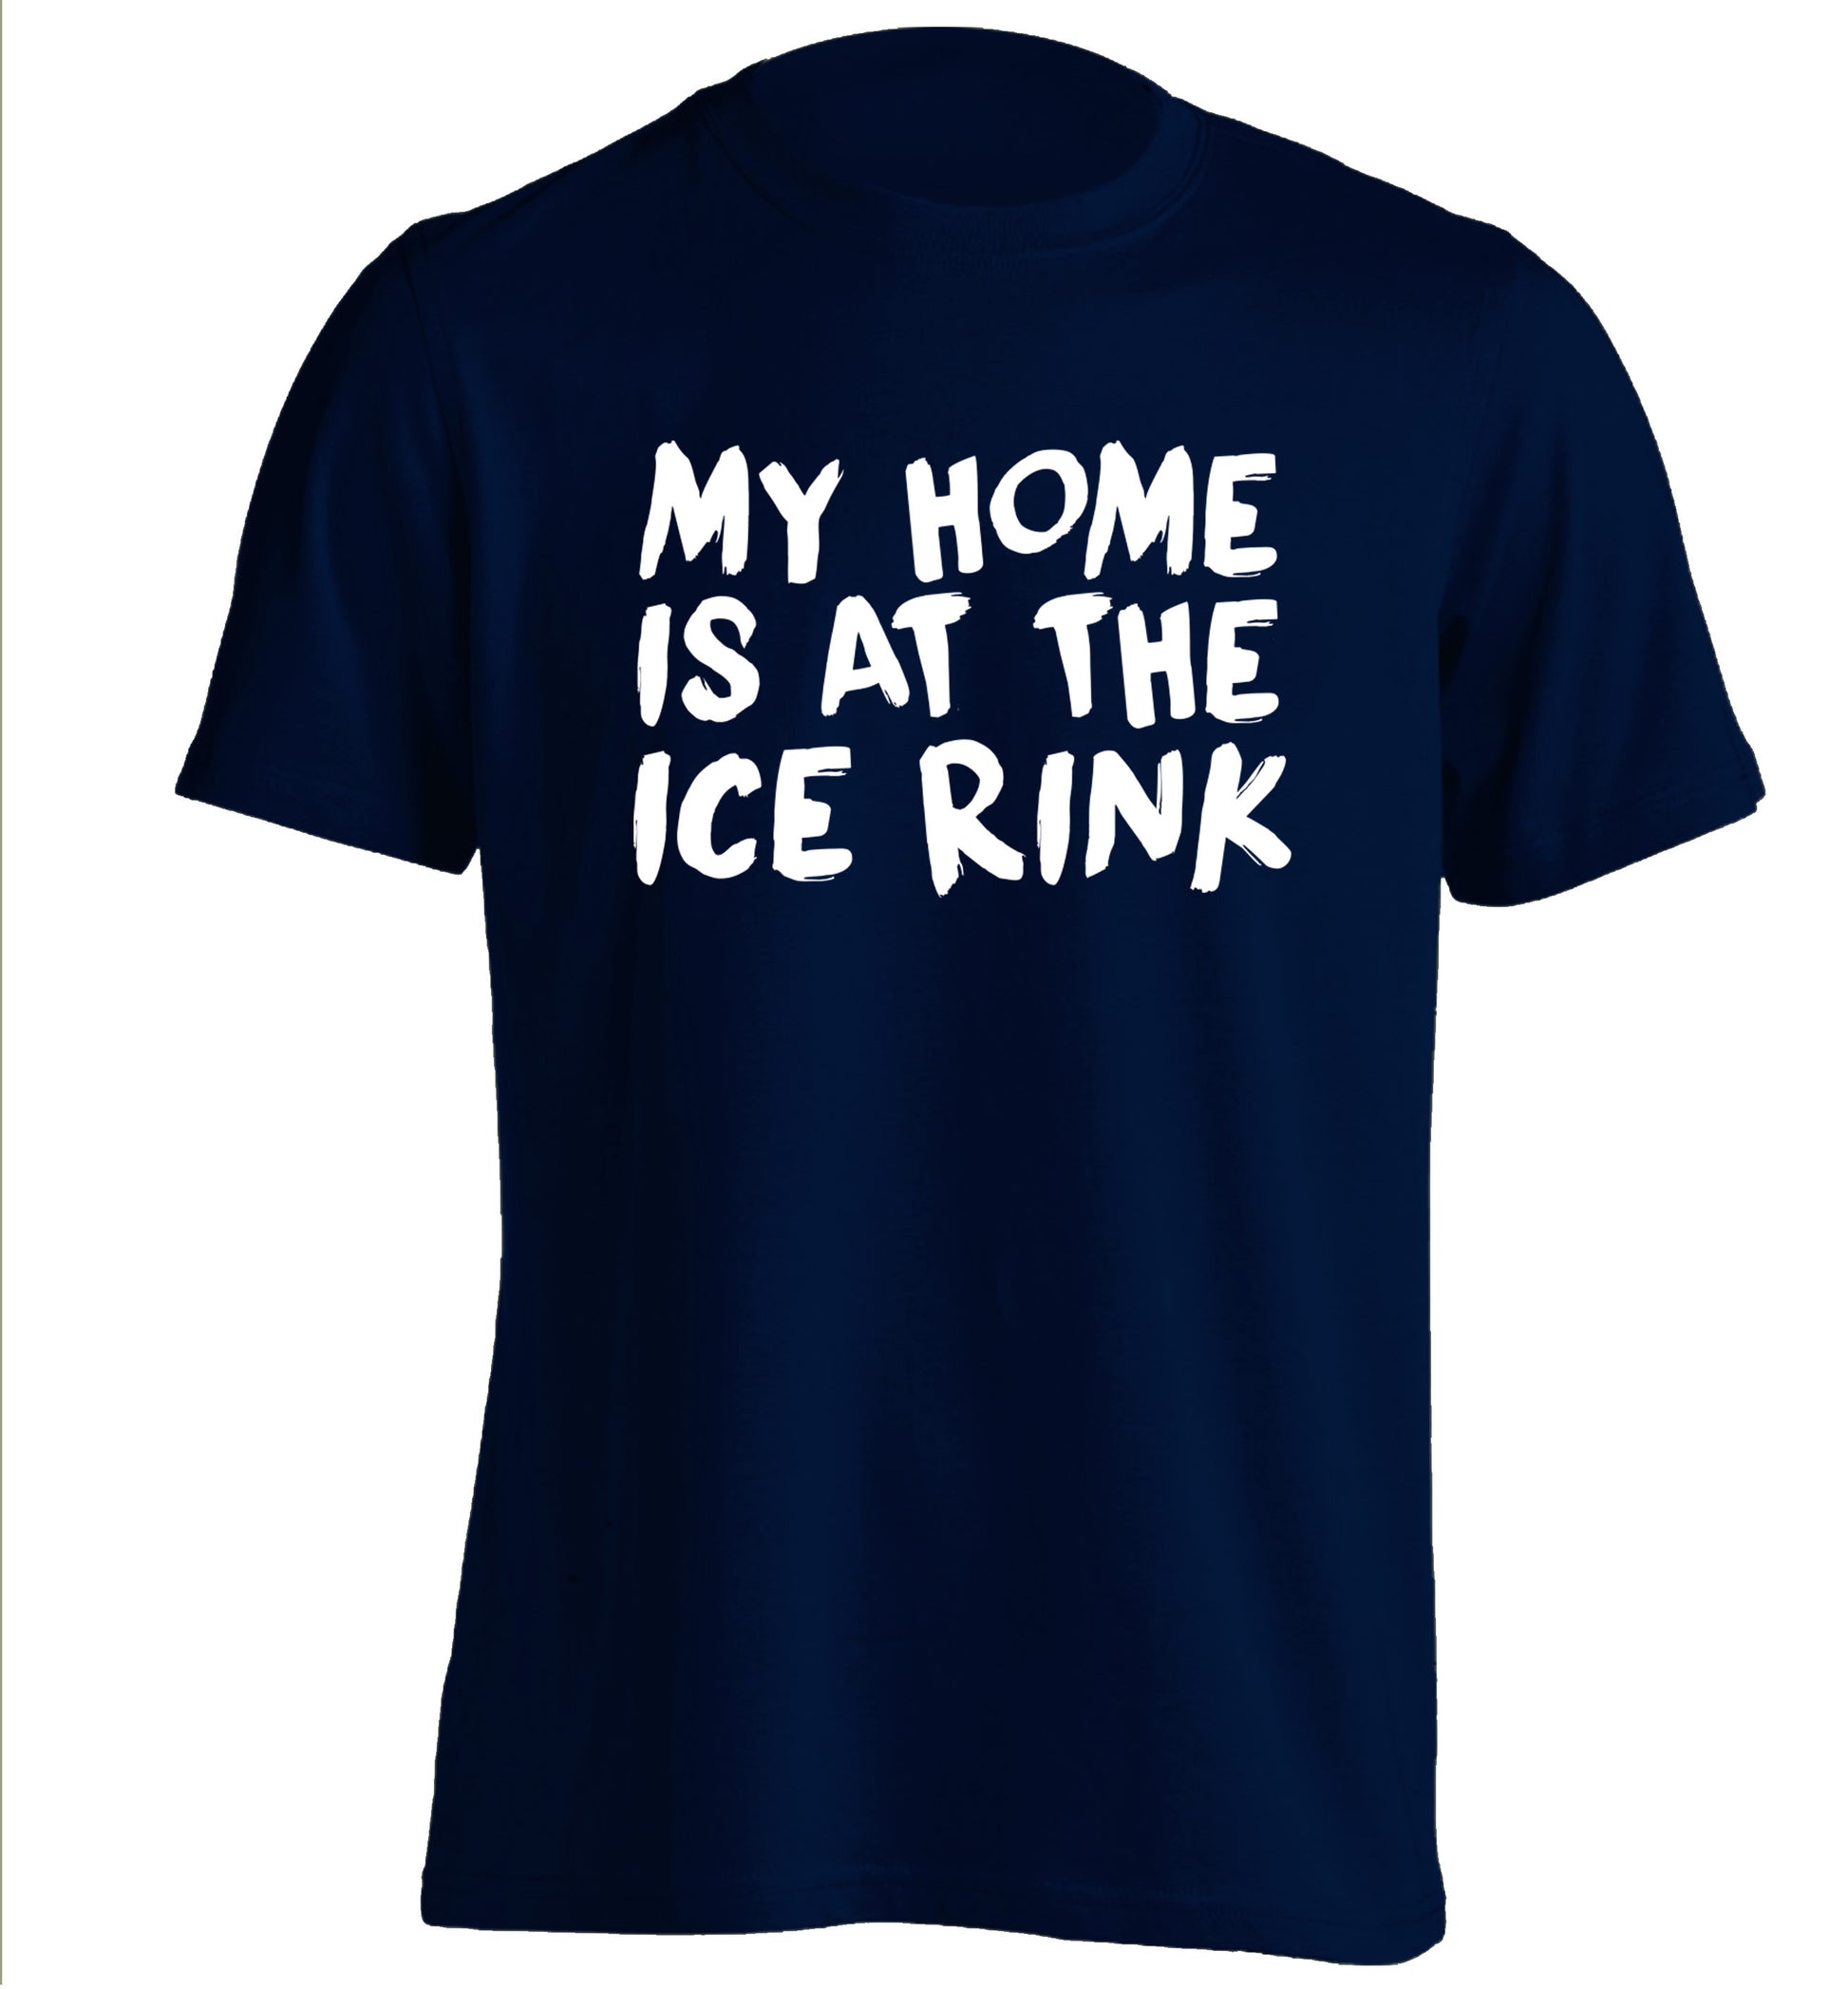 My home is at the ice rink adults unisex navy Tshirt 2XL